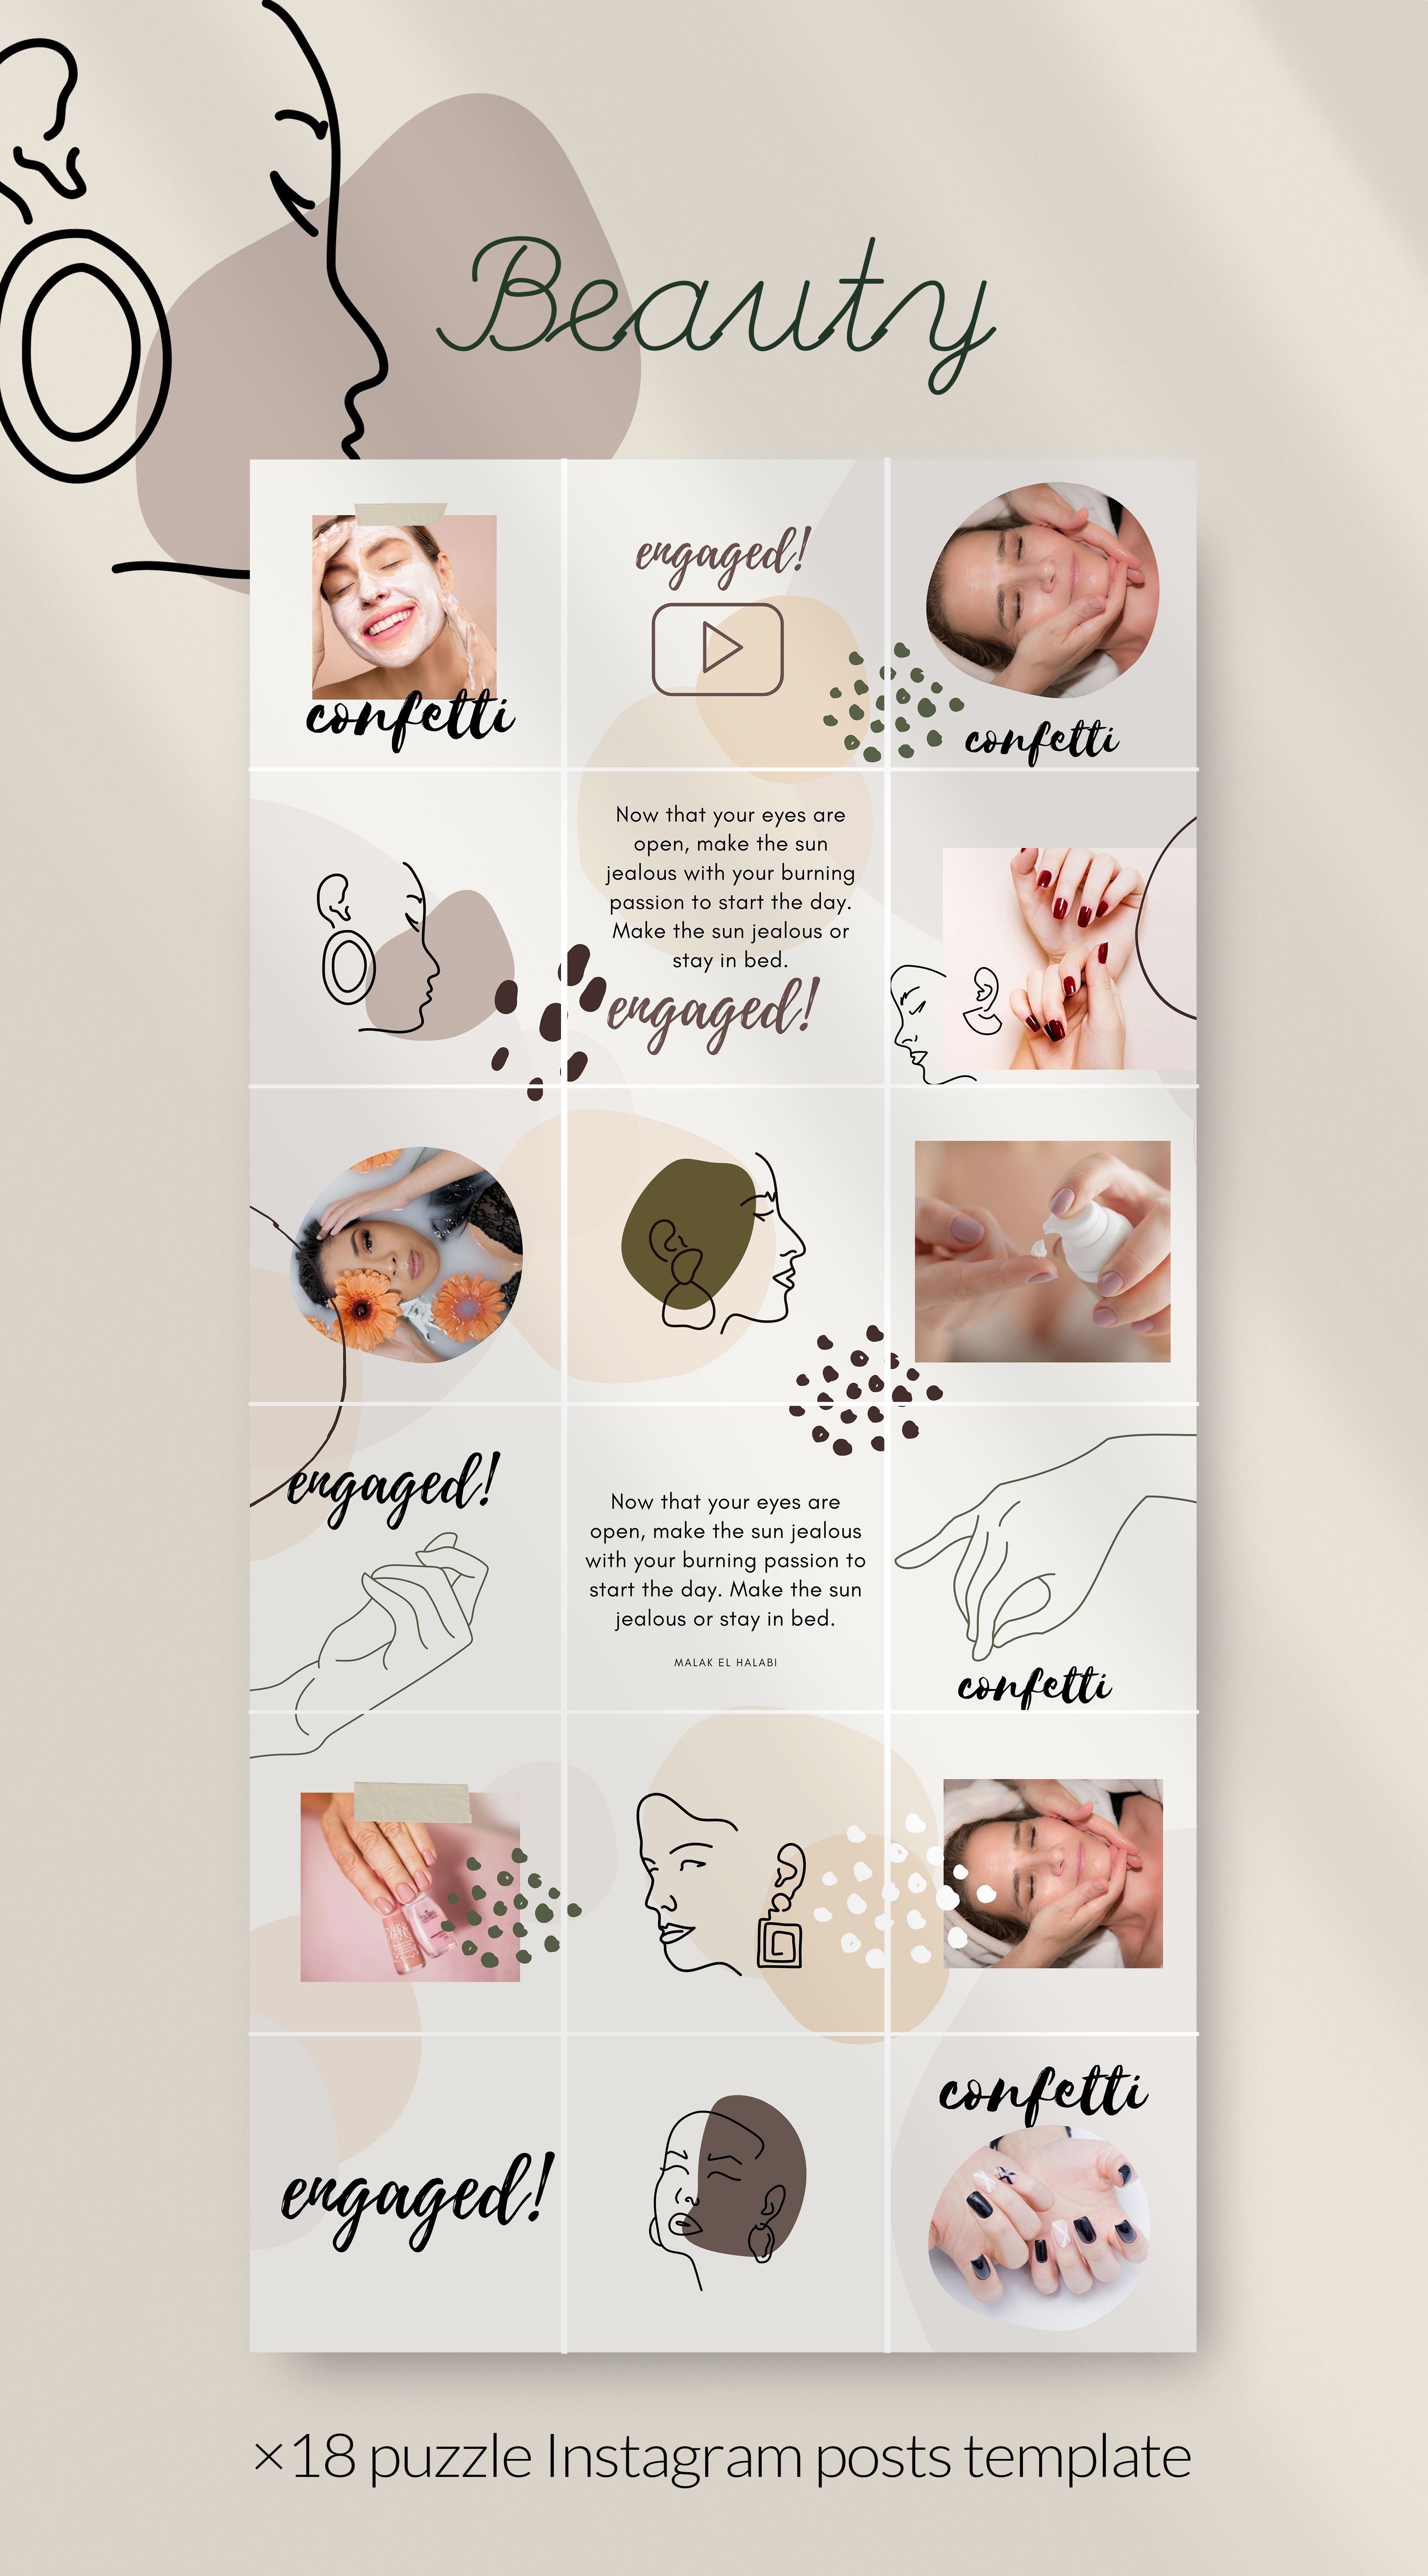 Instagram Puzzle Template for Canva | Instagram Template, Puzzle Feed, line art, Minimalist - Instagram Puzzle Template for Canva | Instagram Template, Puzzle Feed, line art, Minimalist -   19 beauty Design social media ideas